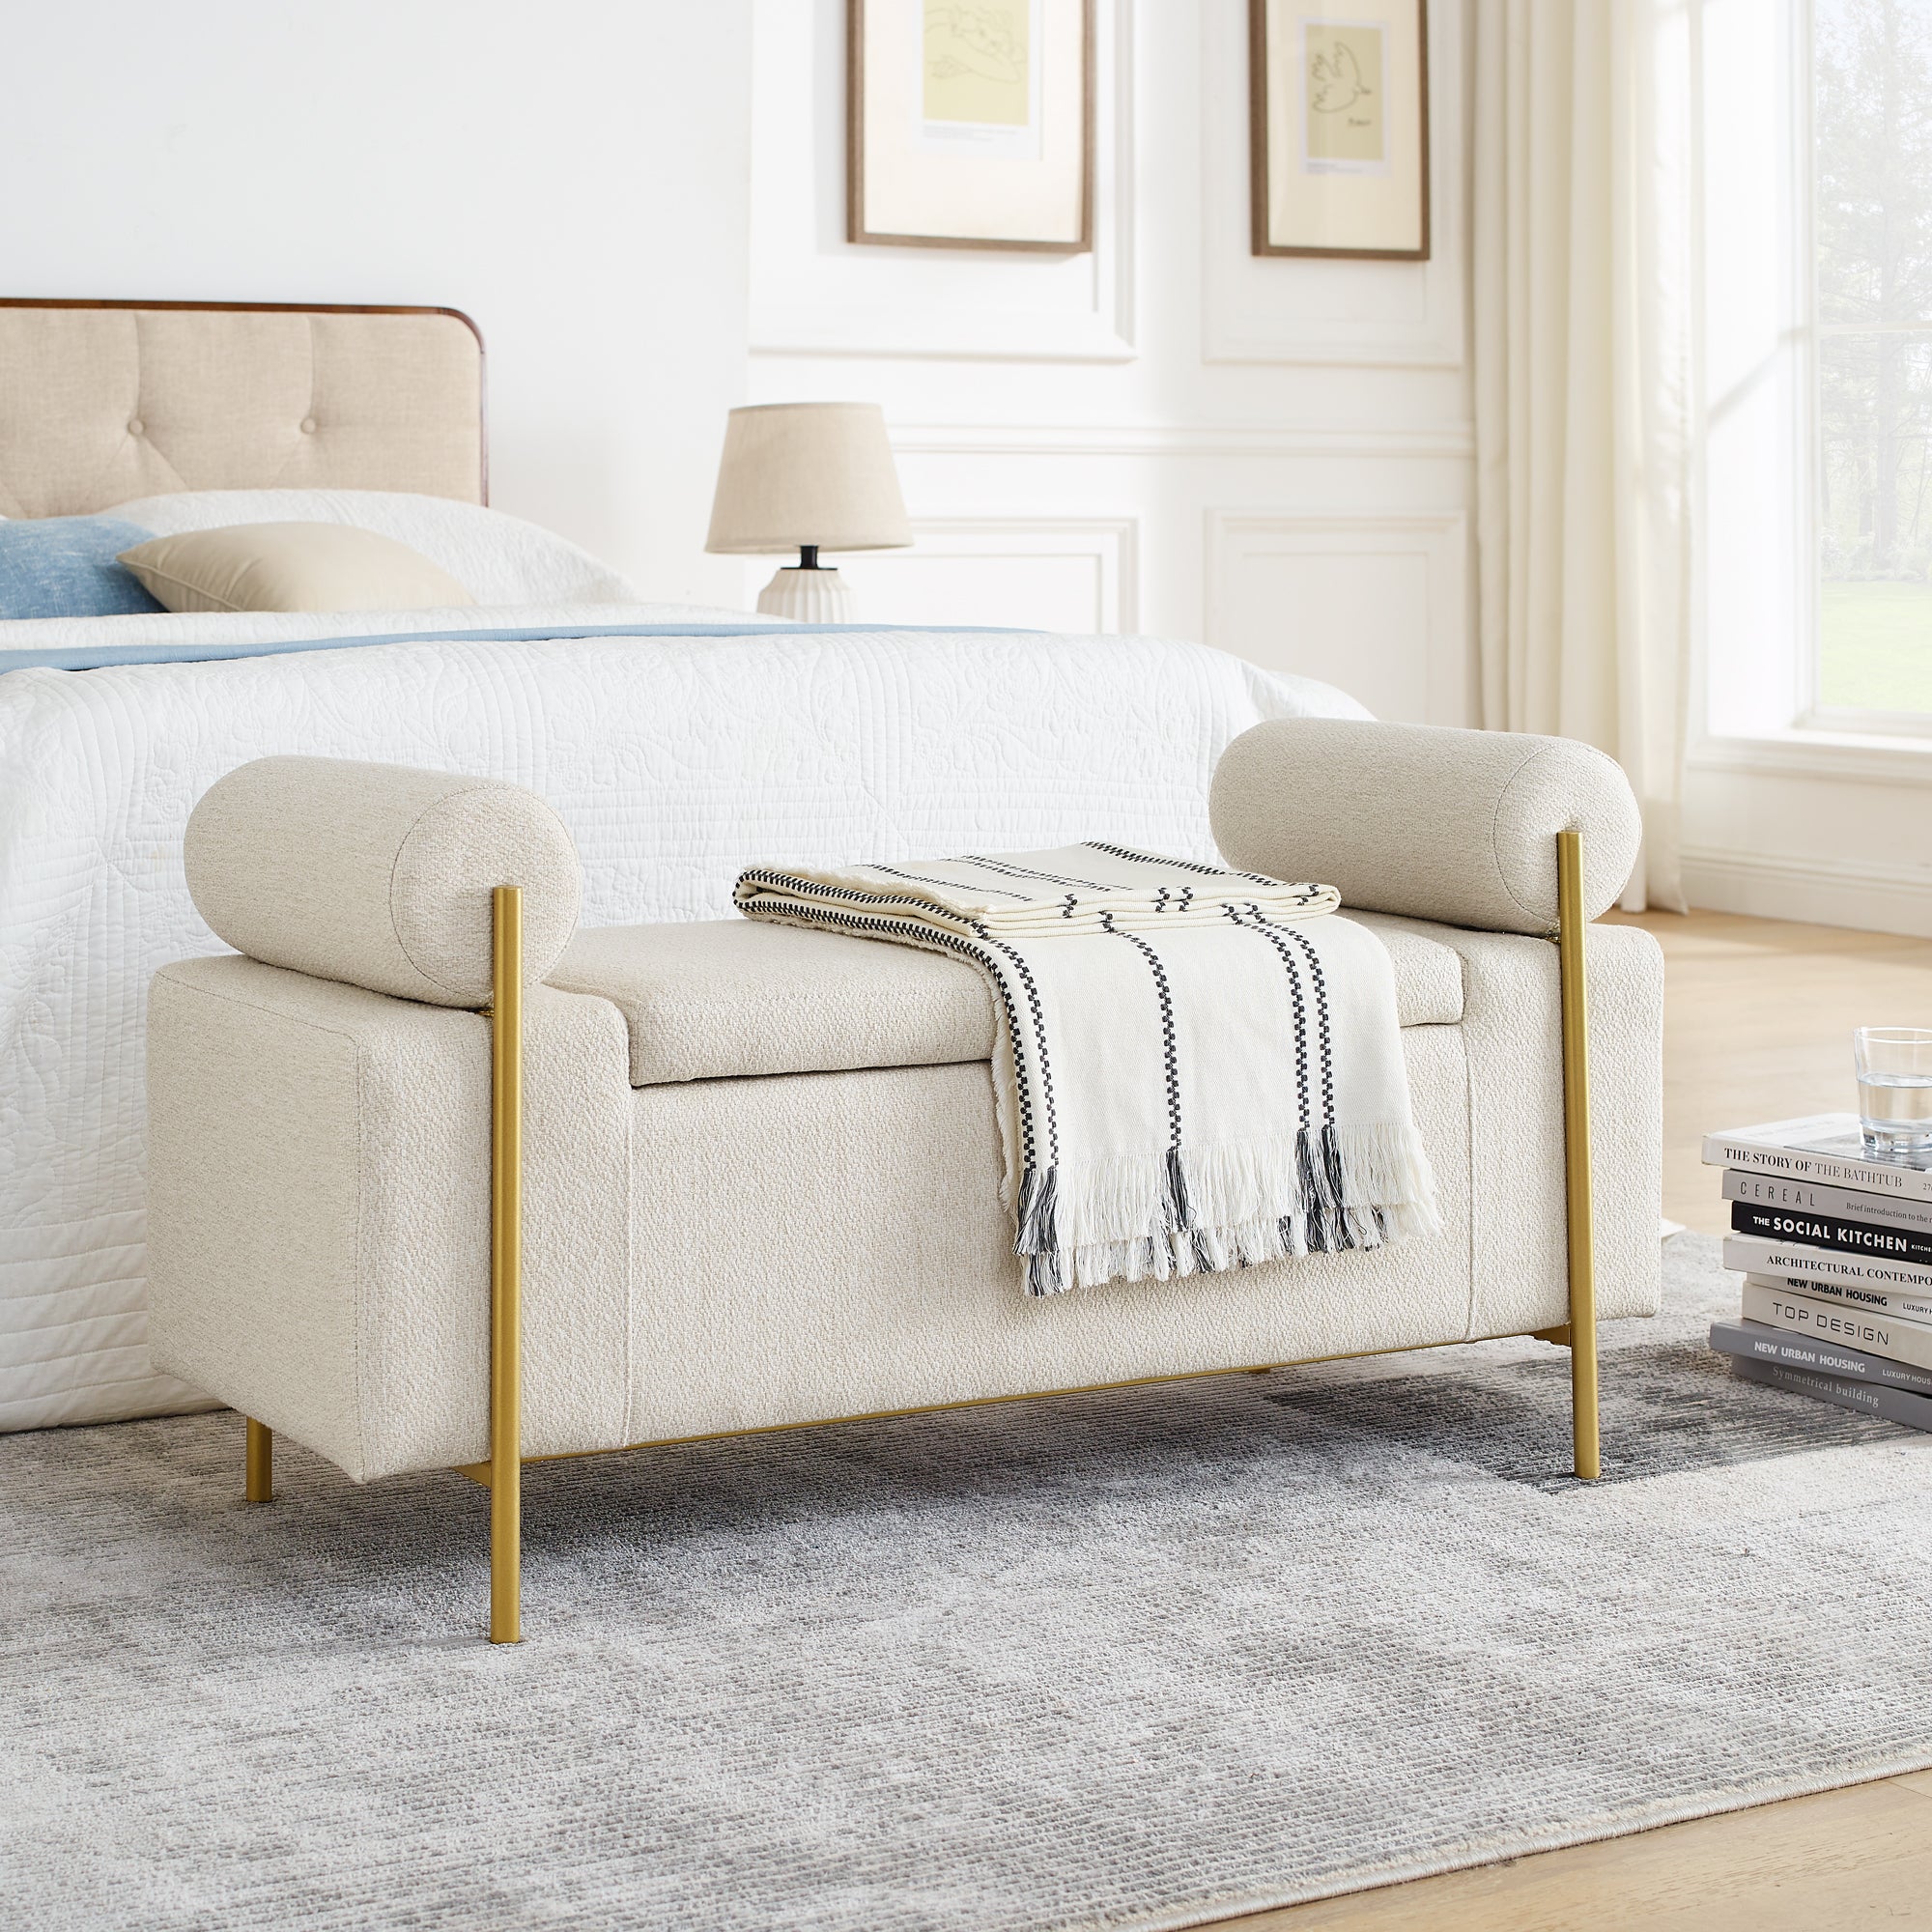  Upholstered Beige Linen Storage Bench with Cylindrical Arms and Iron Legs 